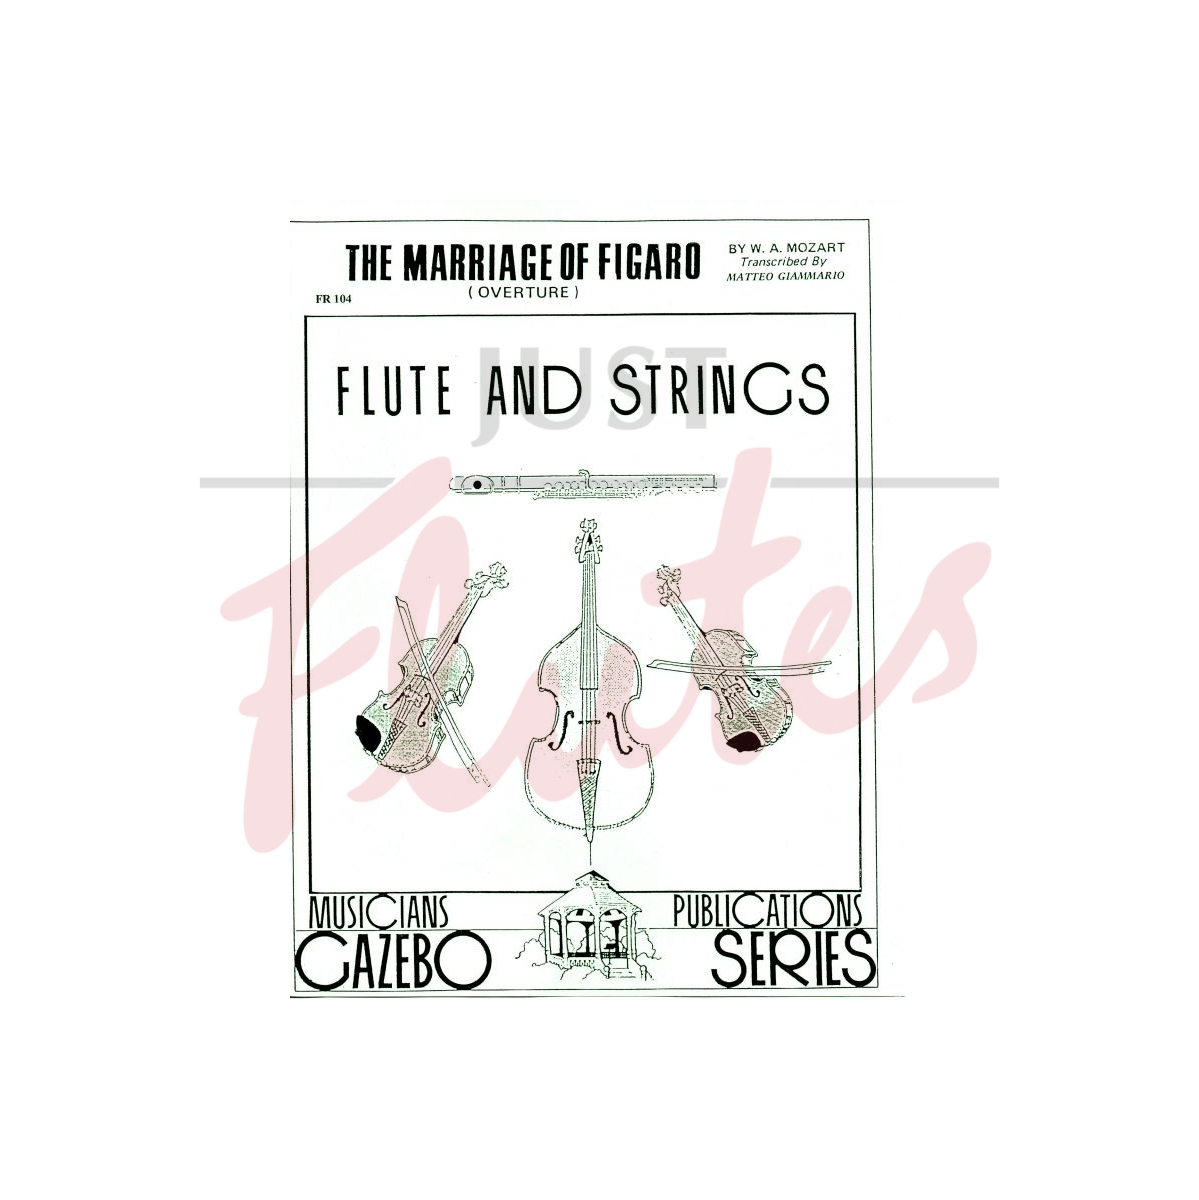 Marriage of Figaro Overture [Flute and Strings]